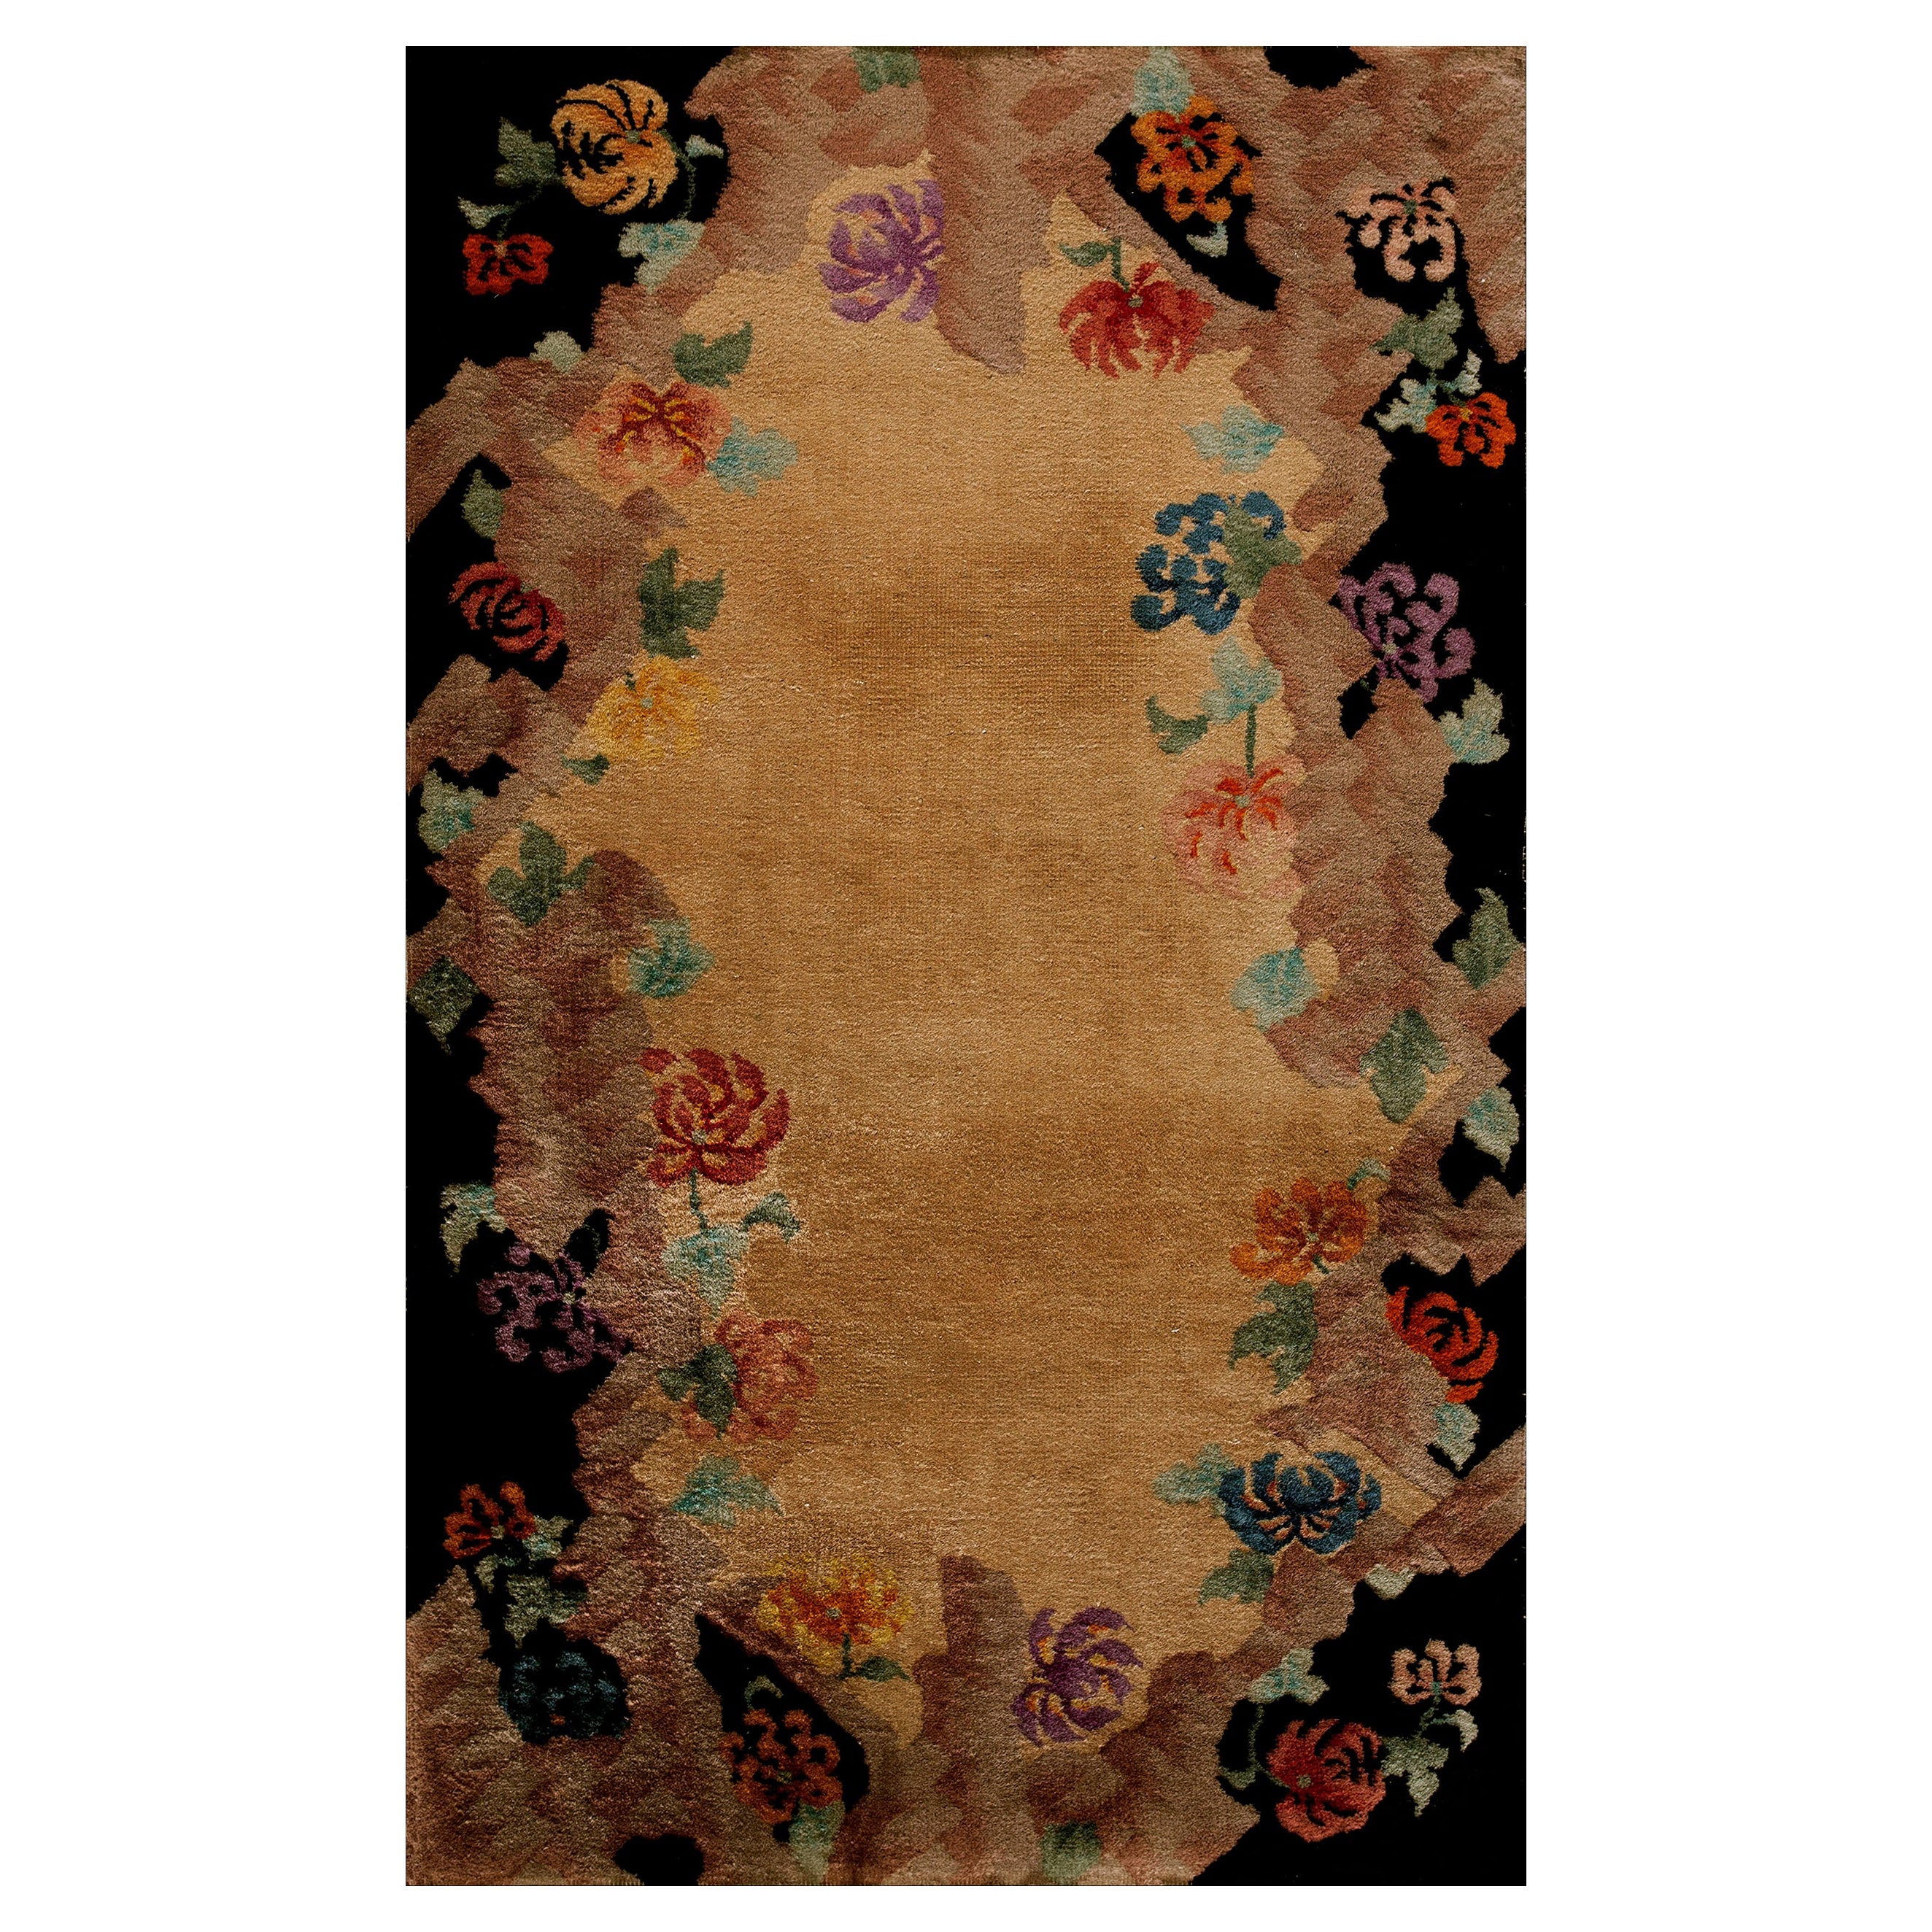 1920s Chinese Art Deco Rug by Nichols Workshop ( 3' x 4'8'' - 92 x 142 ) For Sale